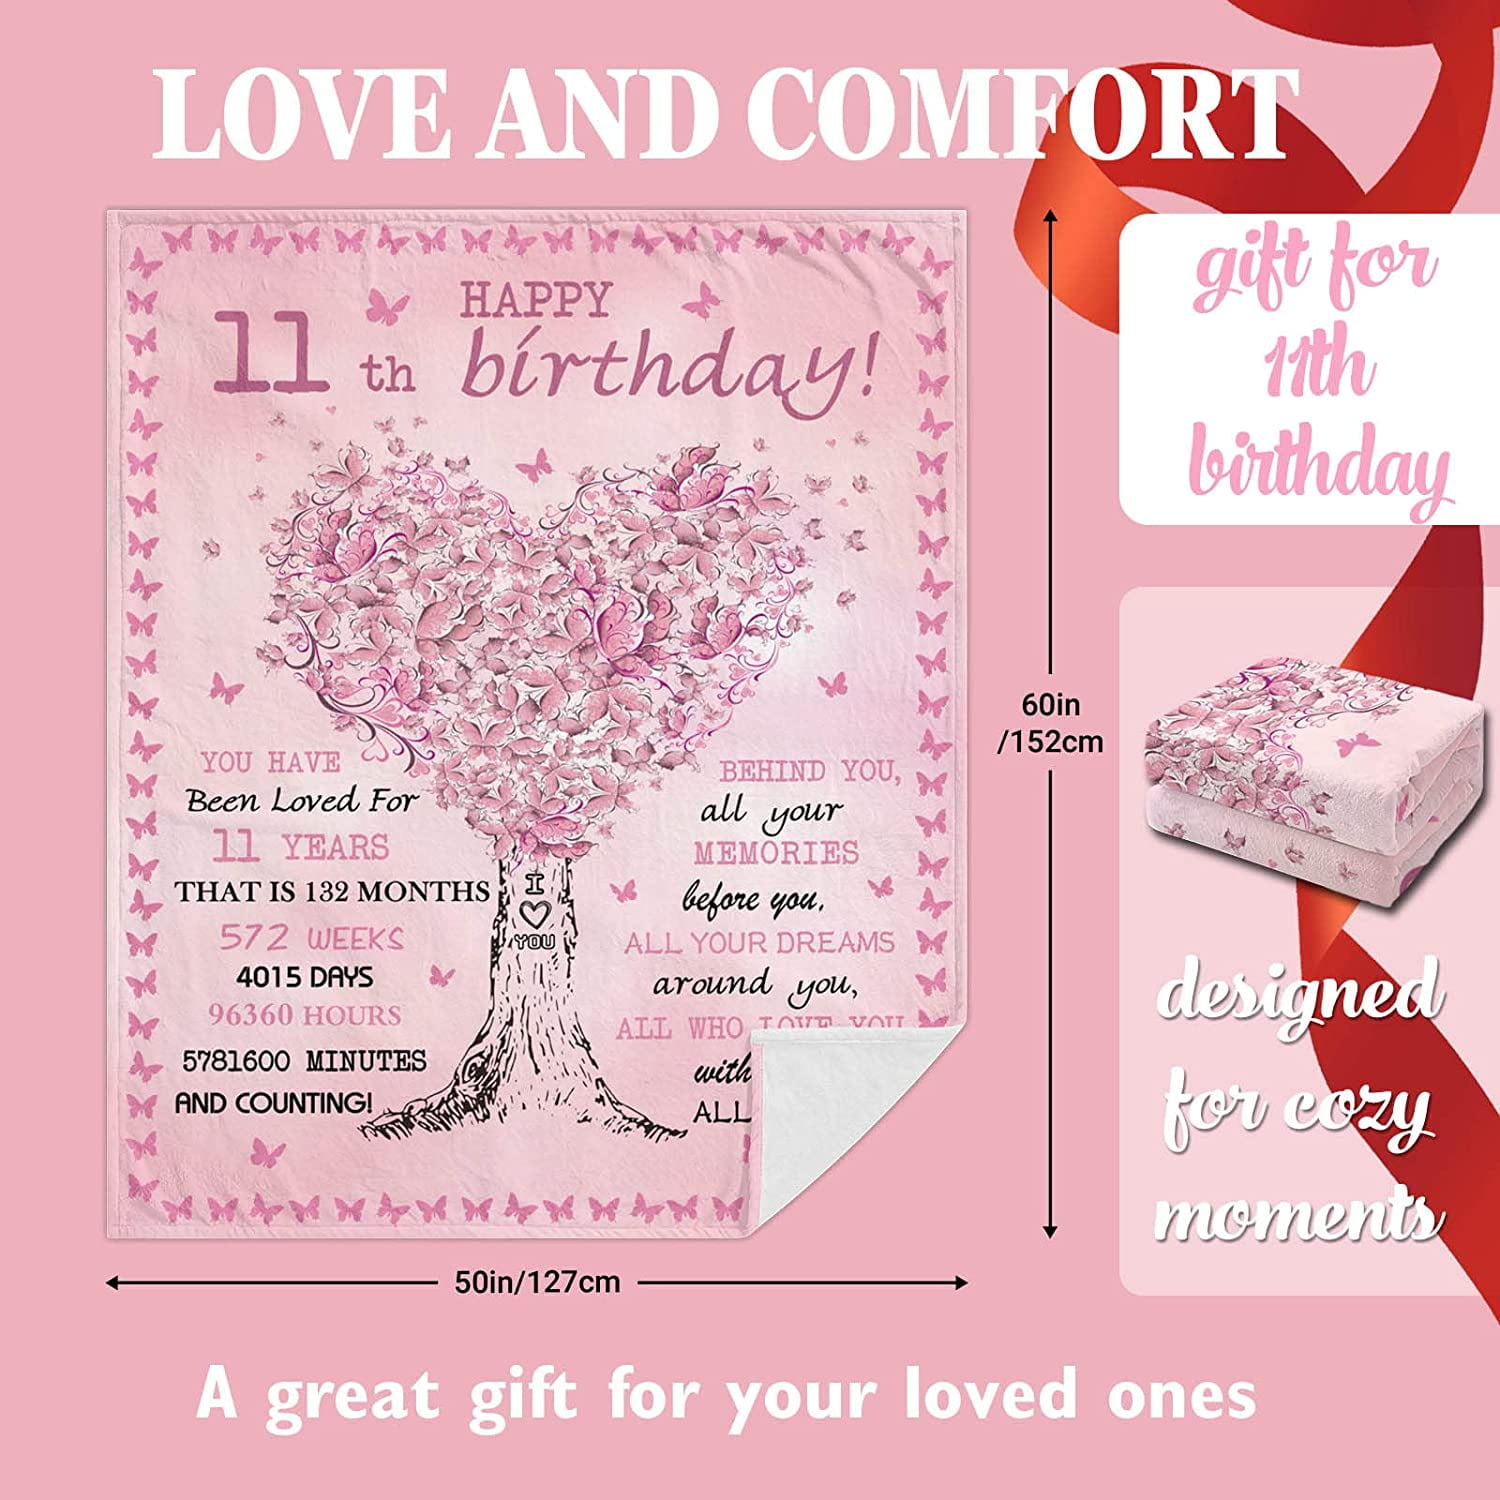 OWL QUEEN 14th Birthday Gifts for Girls - Best Gifts for 14 Year Old Girls  Throw Blanket,Gifts for 14 Year Old Girls Teenage Girls Birthday